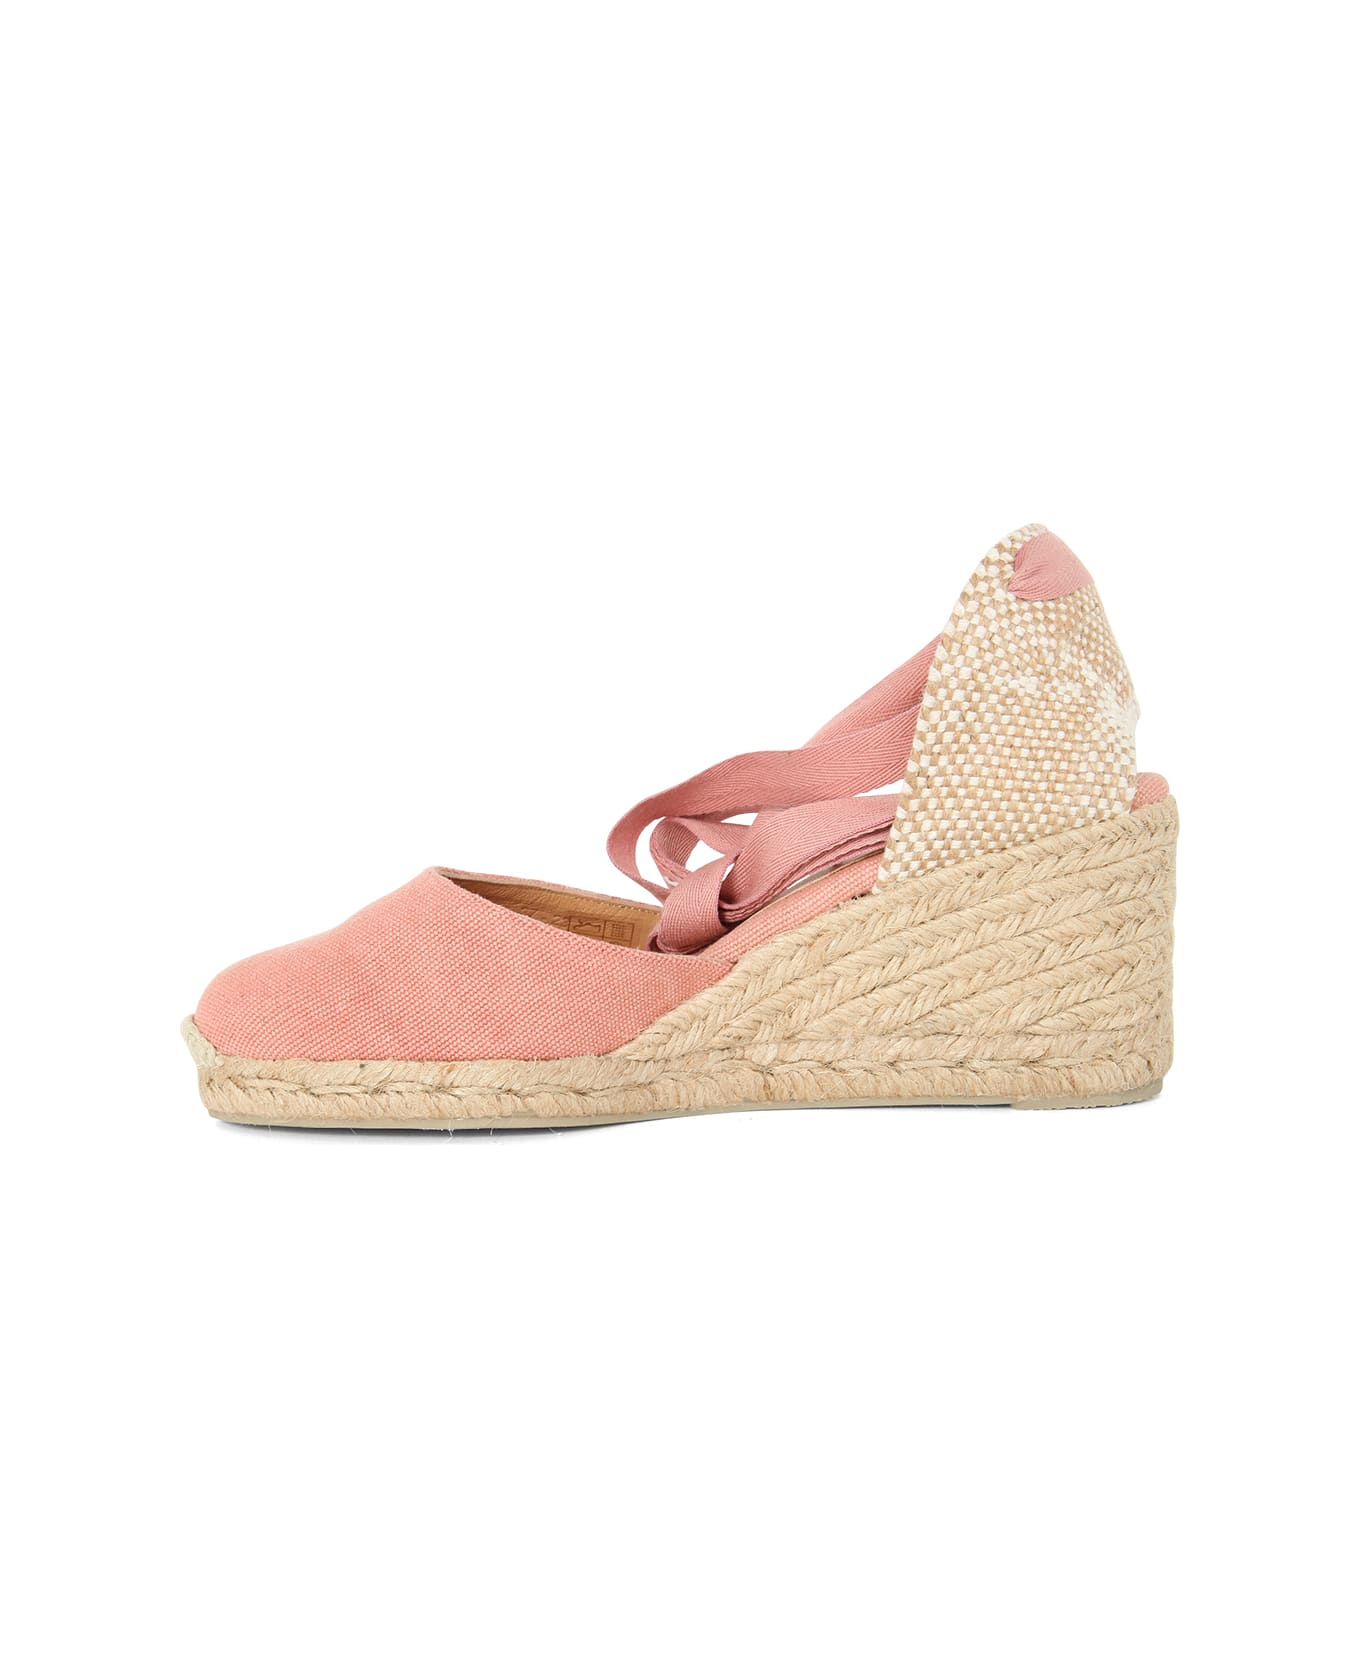 Castañer Carina Espadrilles Wedge Sandal With Ankle Laces - Pink